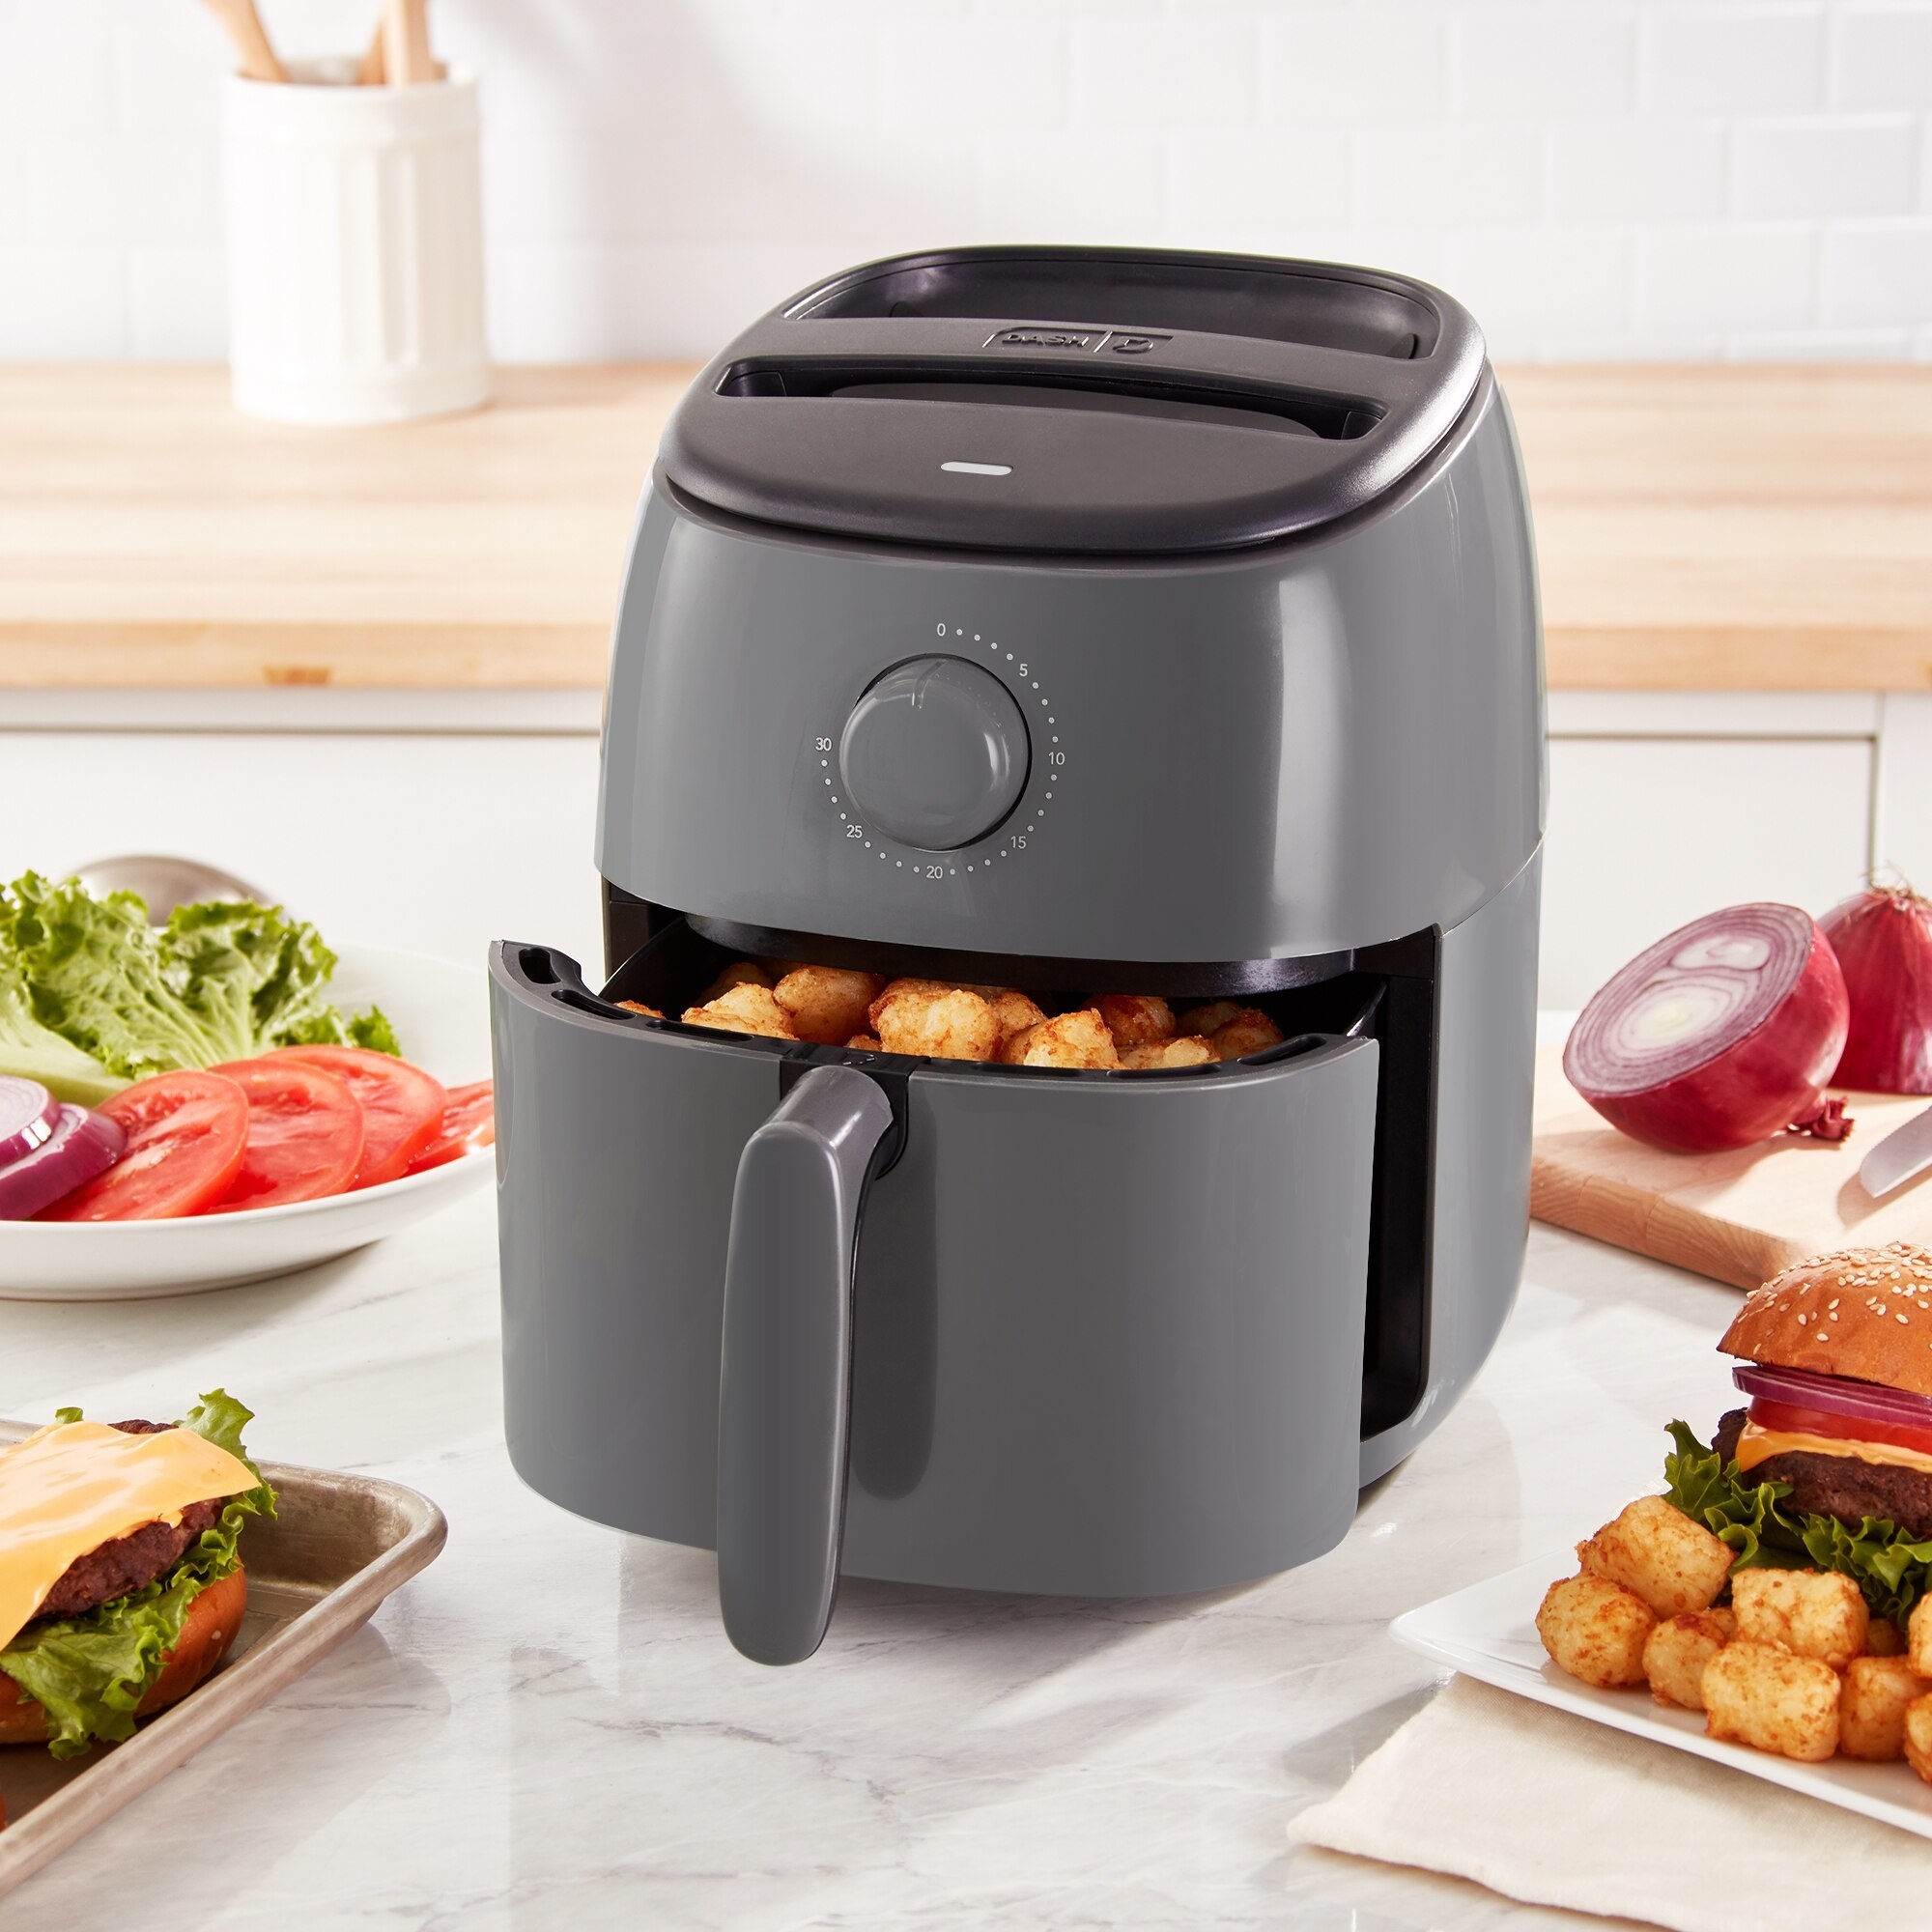 The air fryer with tater tots in the basket